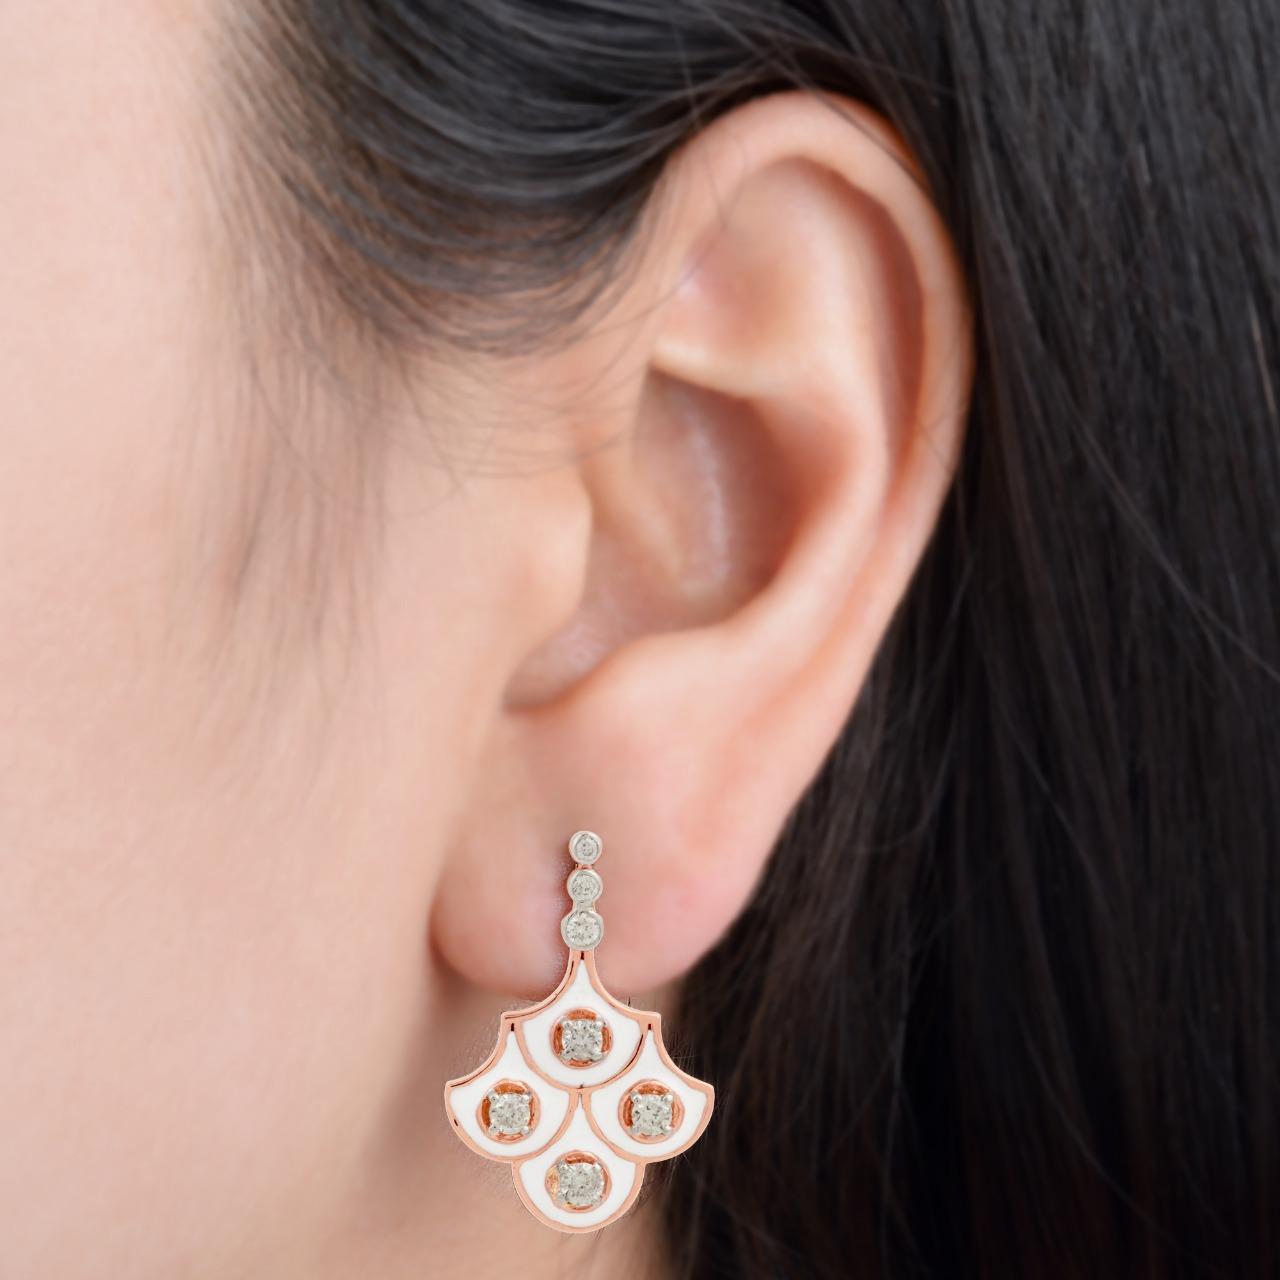 This white enamel earrings are crafted from 14-karat rose gold & set with .88 carats of sparkling diamonds. 

FOLLOW MEGHNA JEWELS storefront to view the latest collection & exclusive pieces. Meghna Jewels is proudly rated as a Top Seller on 1stdibs